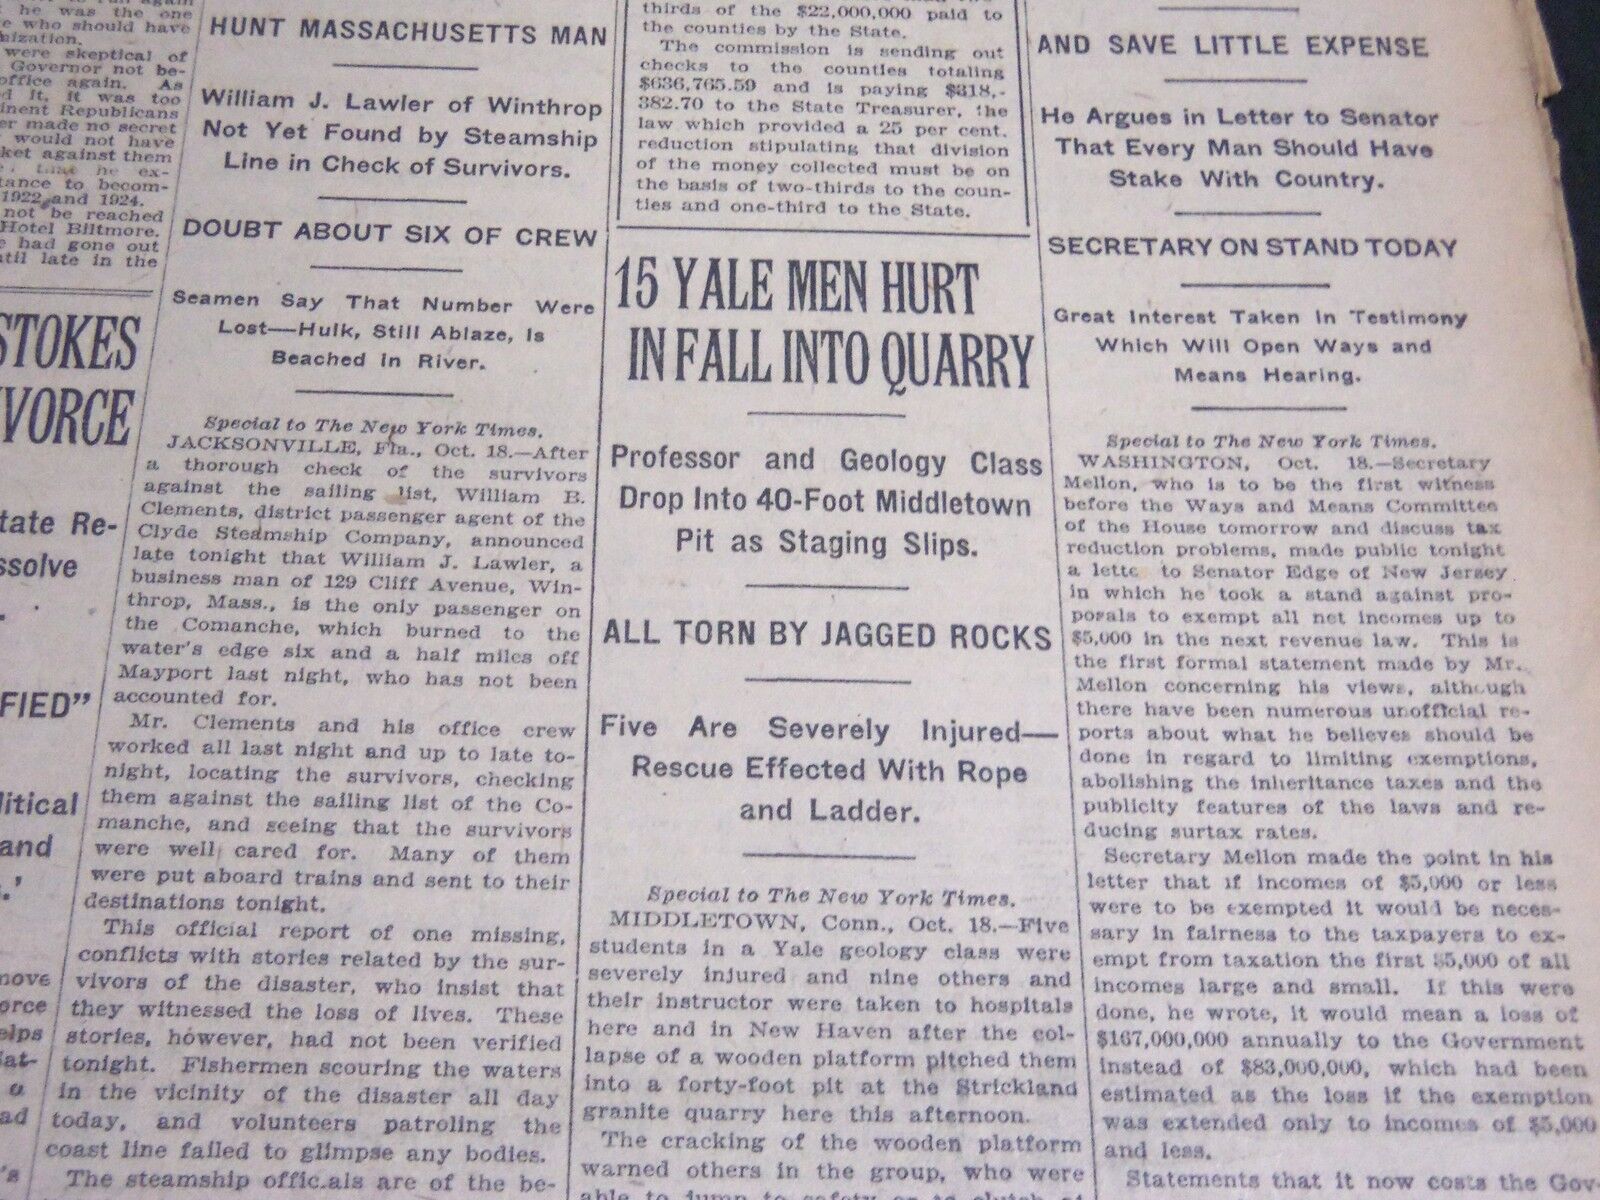 1925 OCTOBER 19 NEW YORK TIMES - 15 YALE MEN HURT IN QUARRY FALL - NT 5396